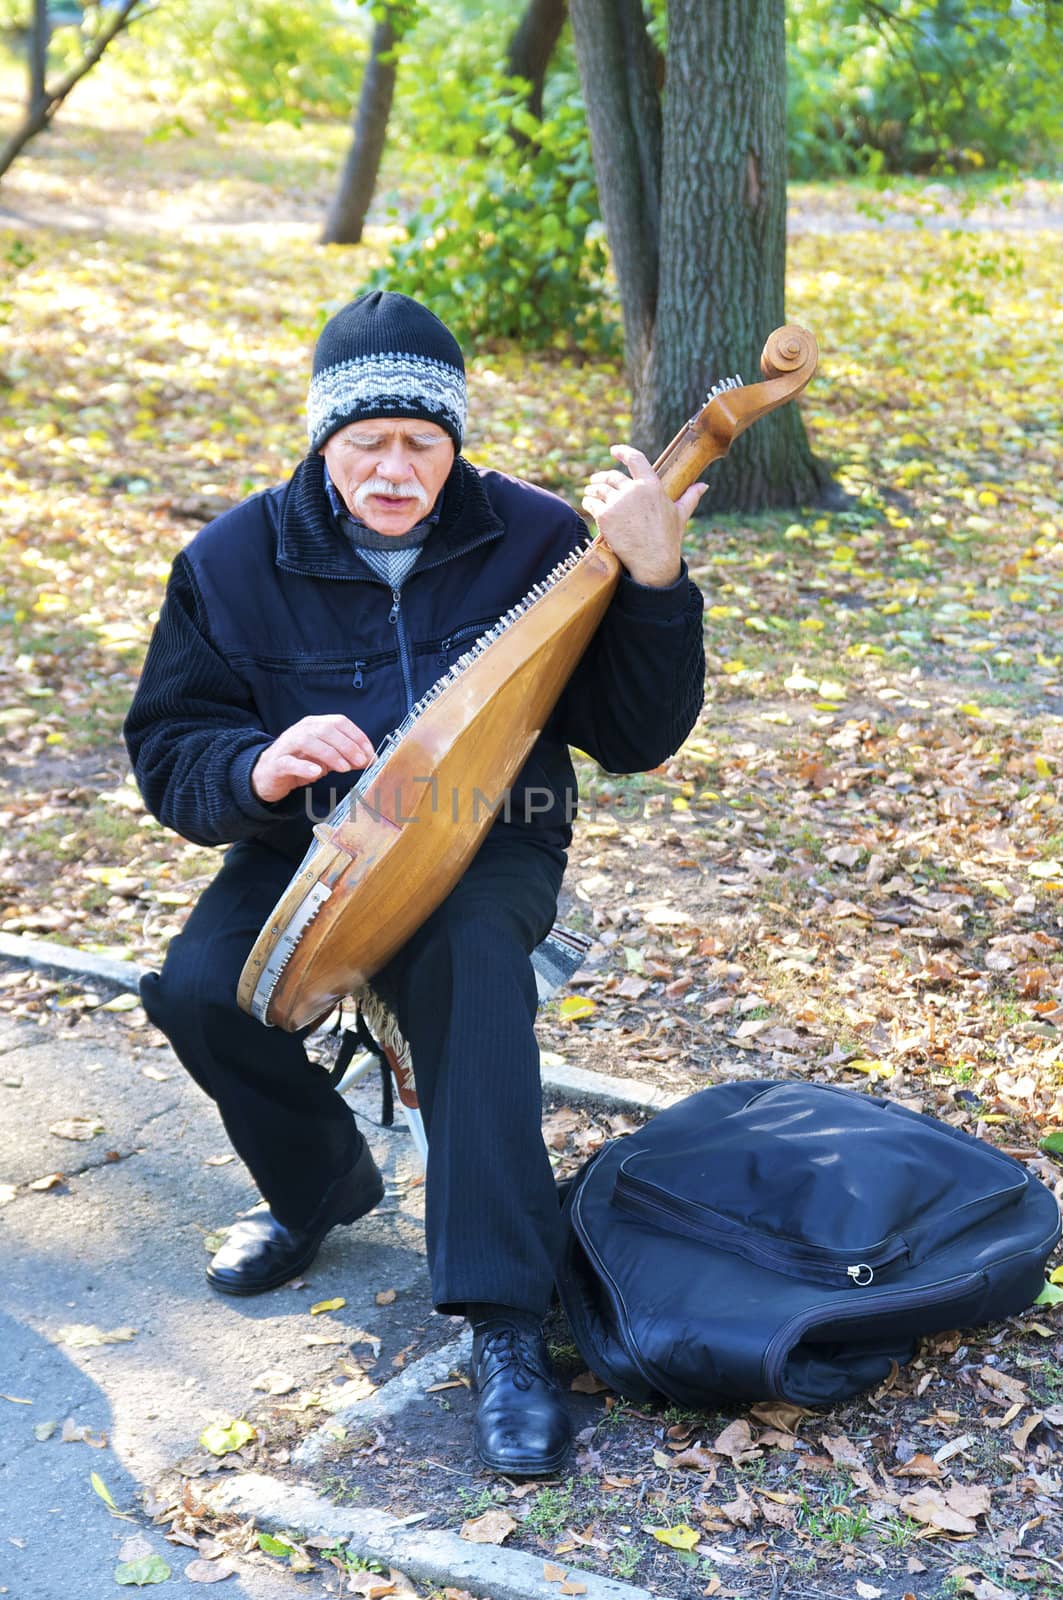 bandurist musician on the streets of the city of Kharkov